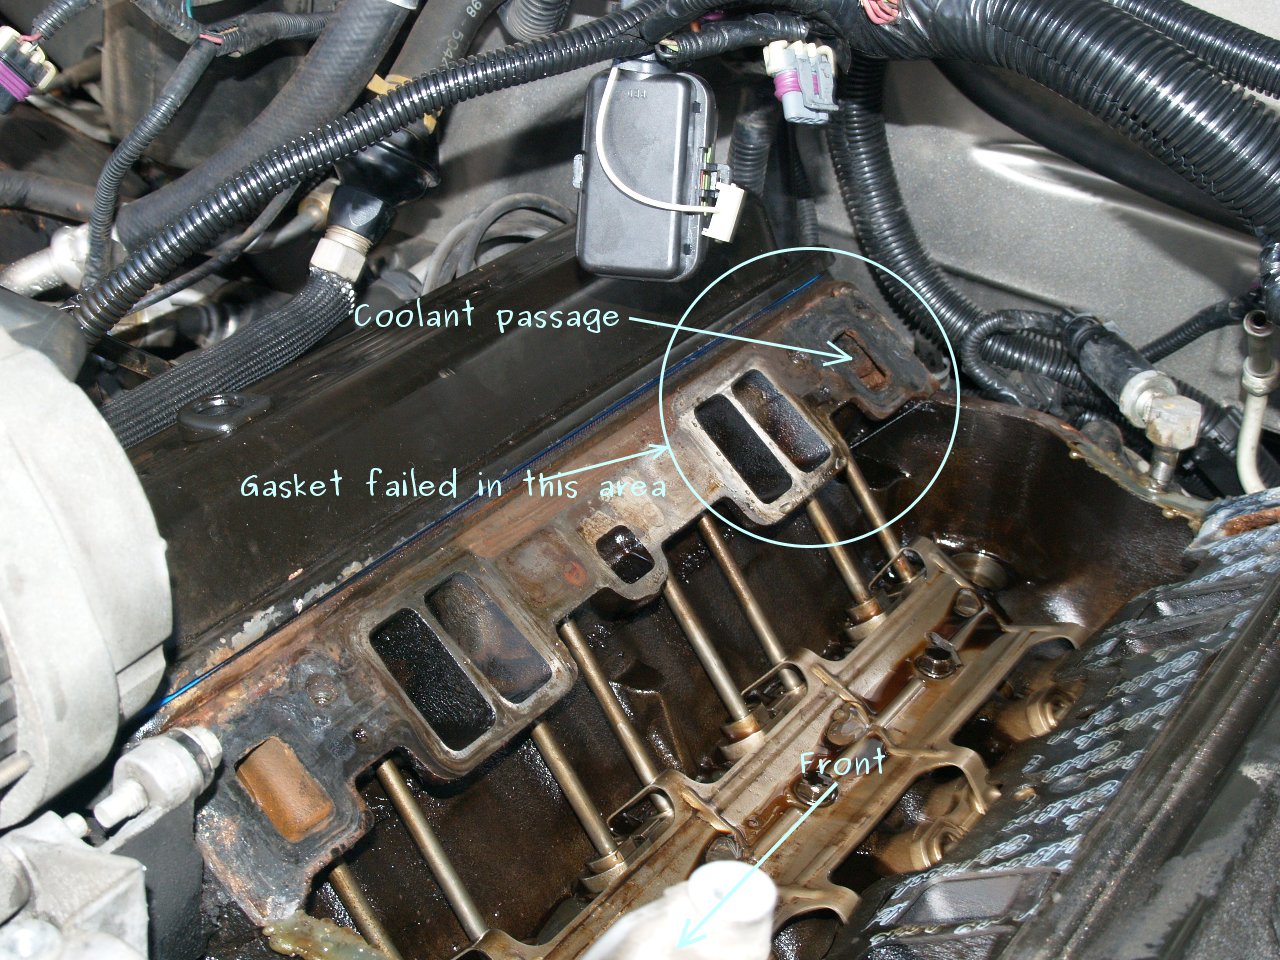 See B1245 in engine